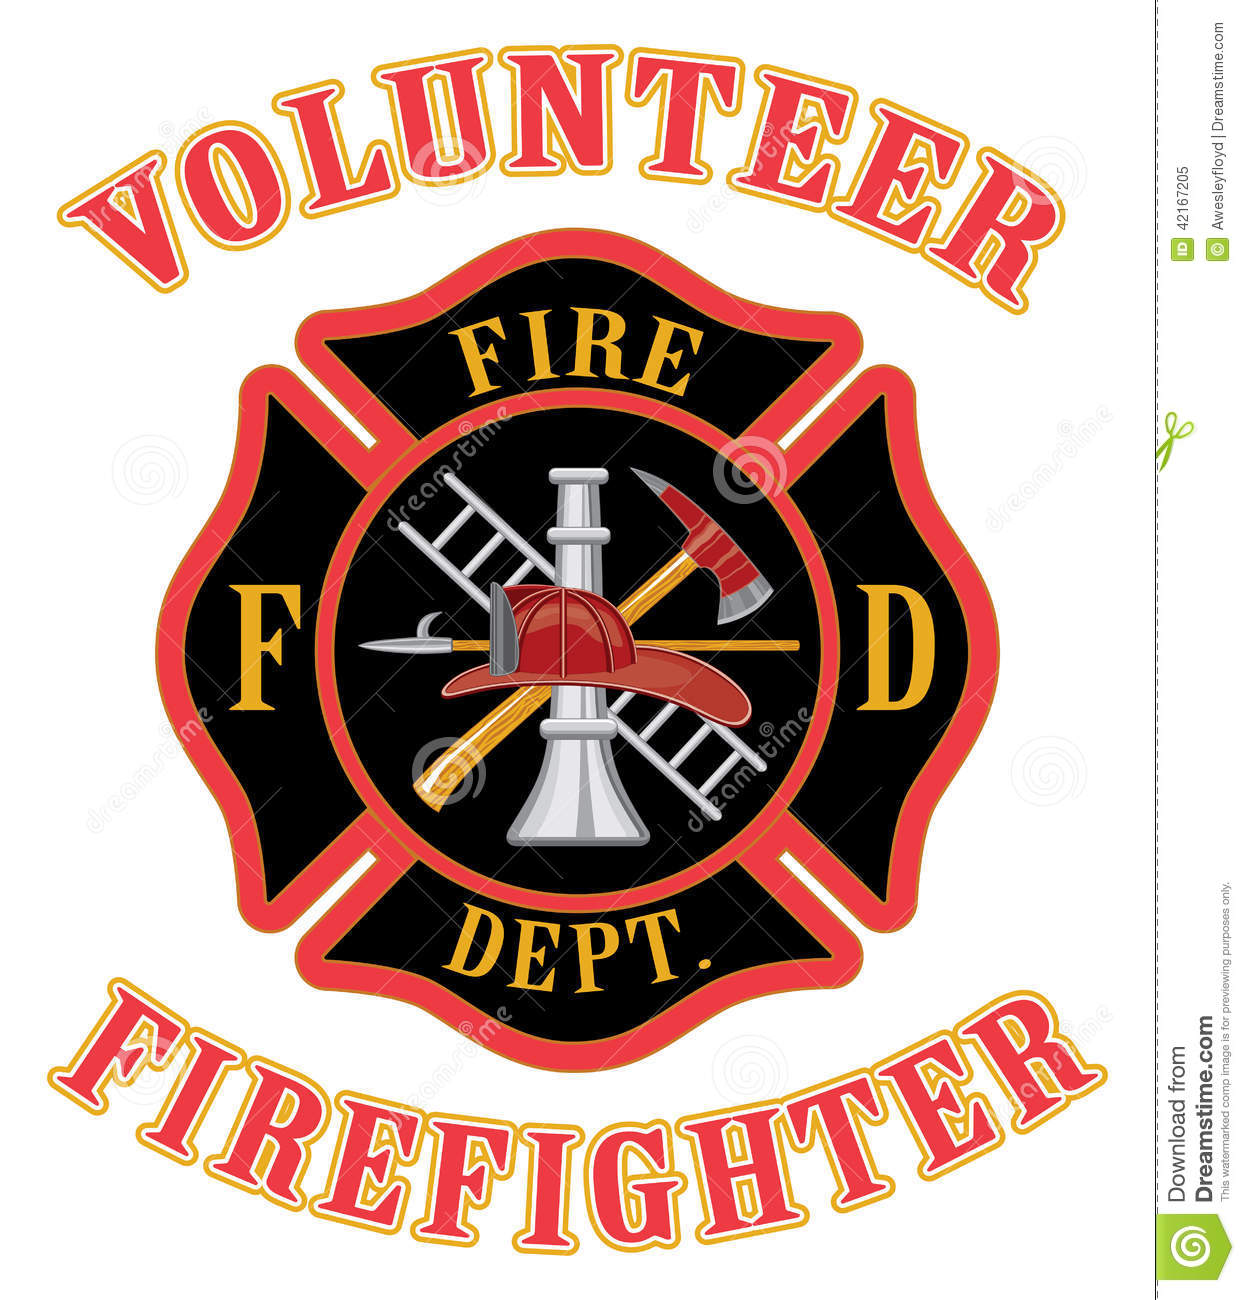 Firefighter Symbol Photos For You